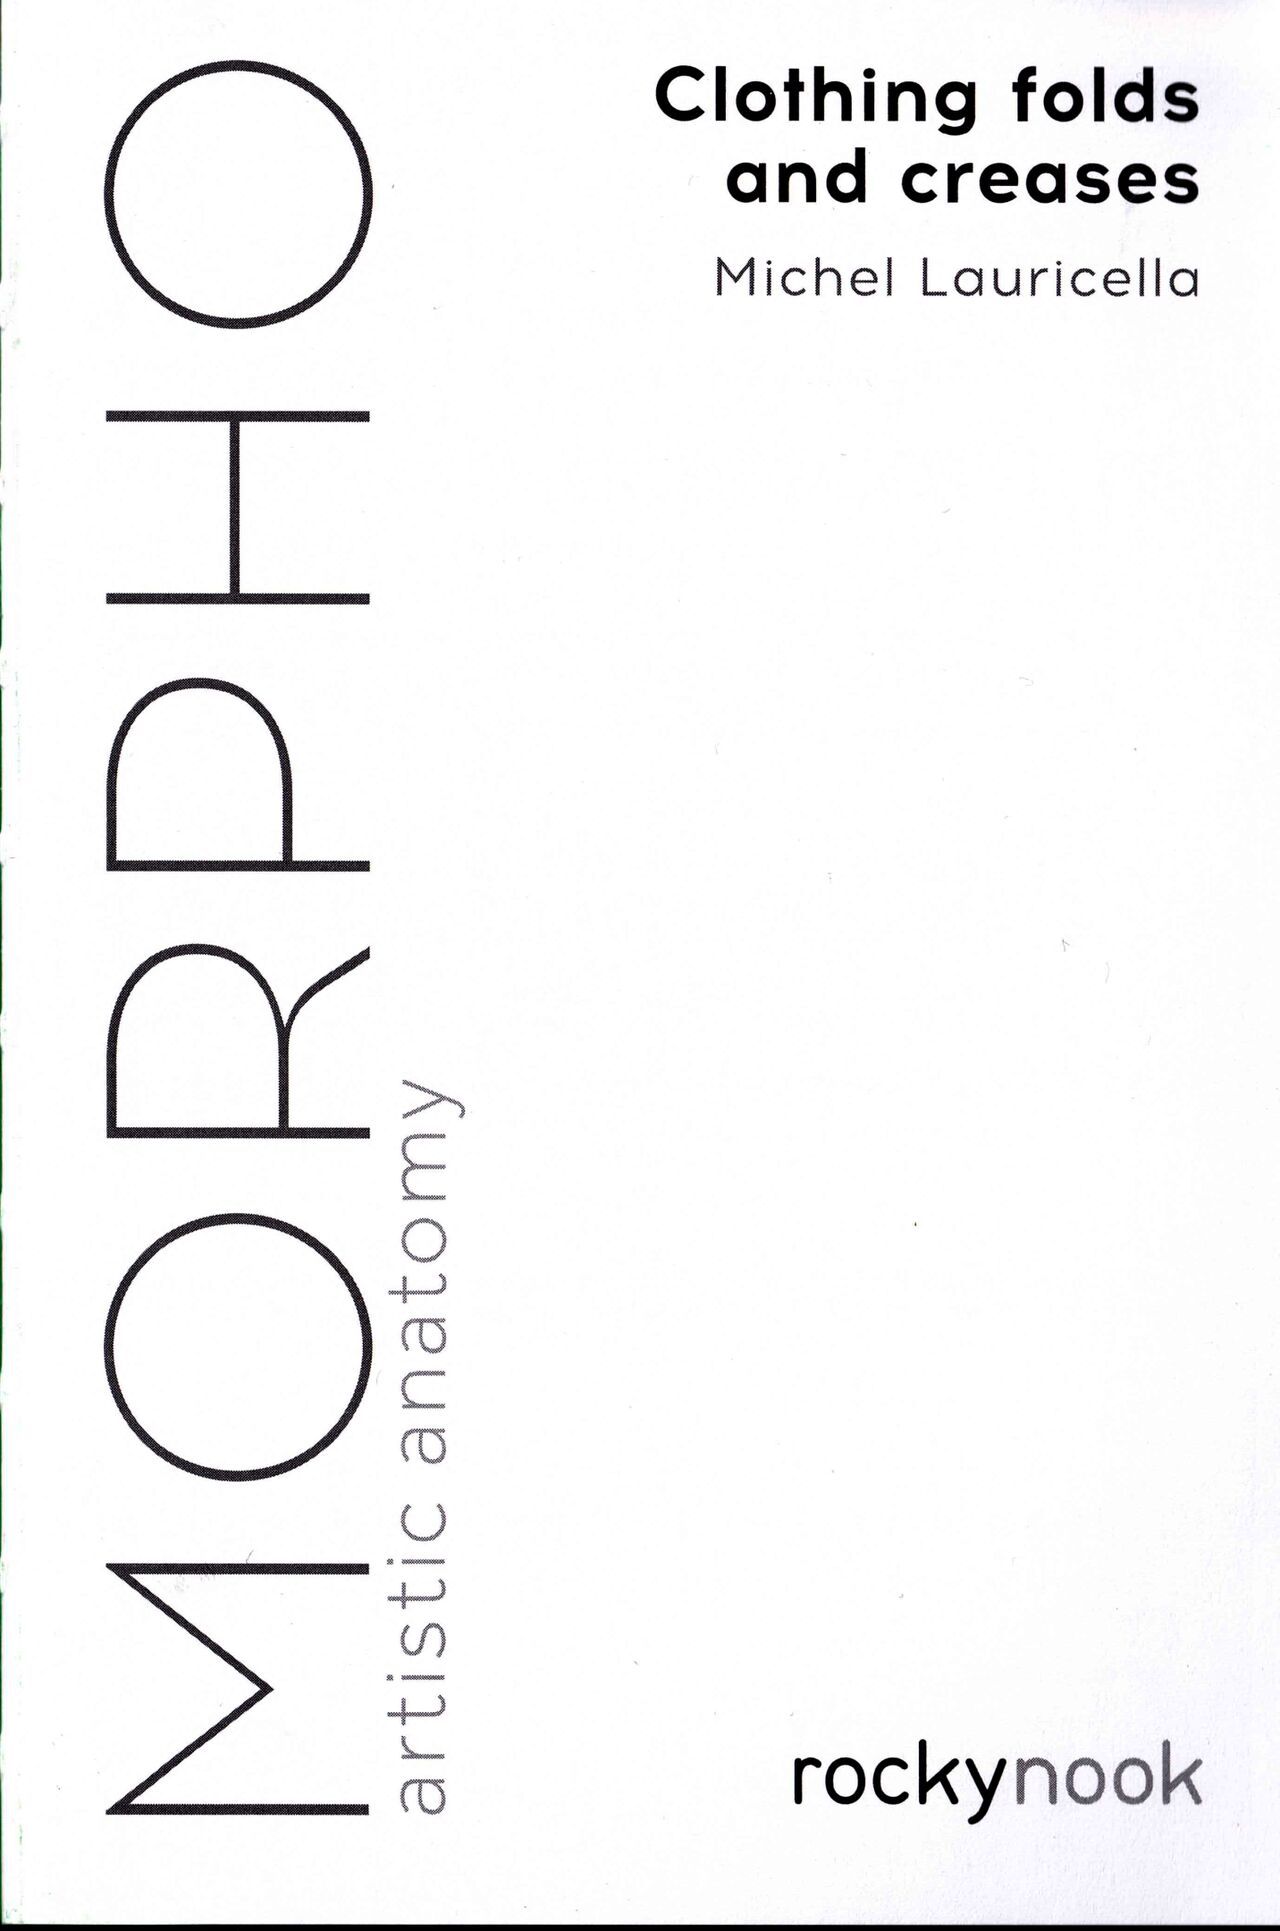 Morpho Clothing Folds and Creases Anatomy for Artists 3